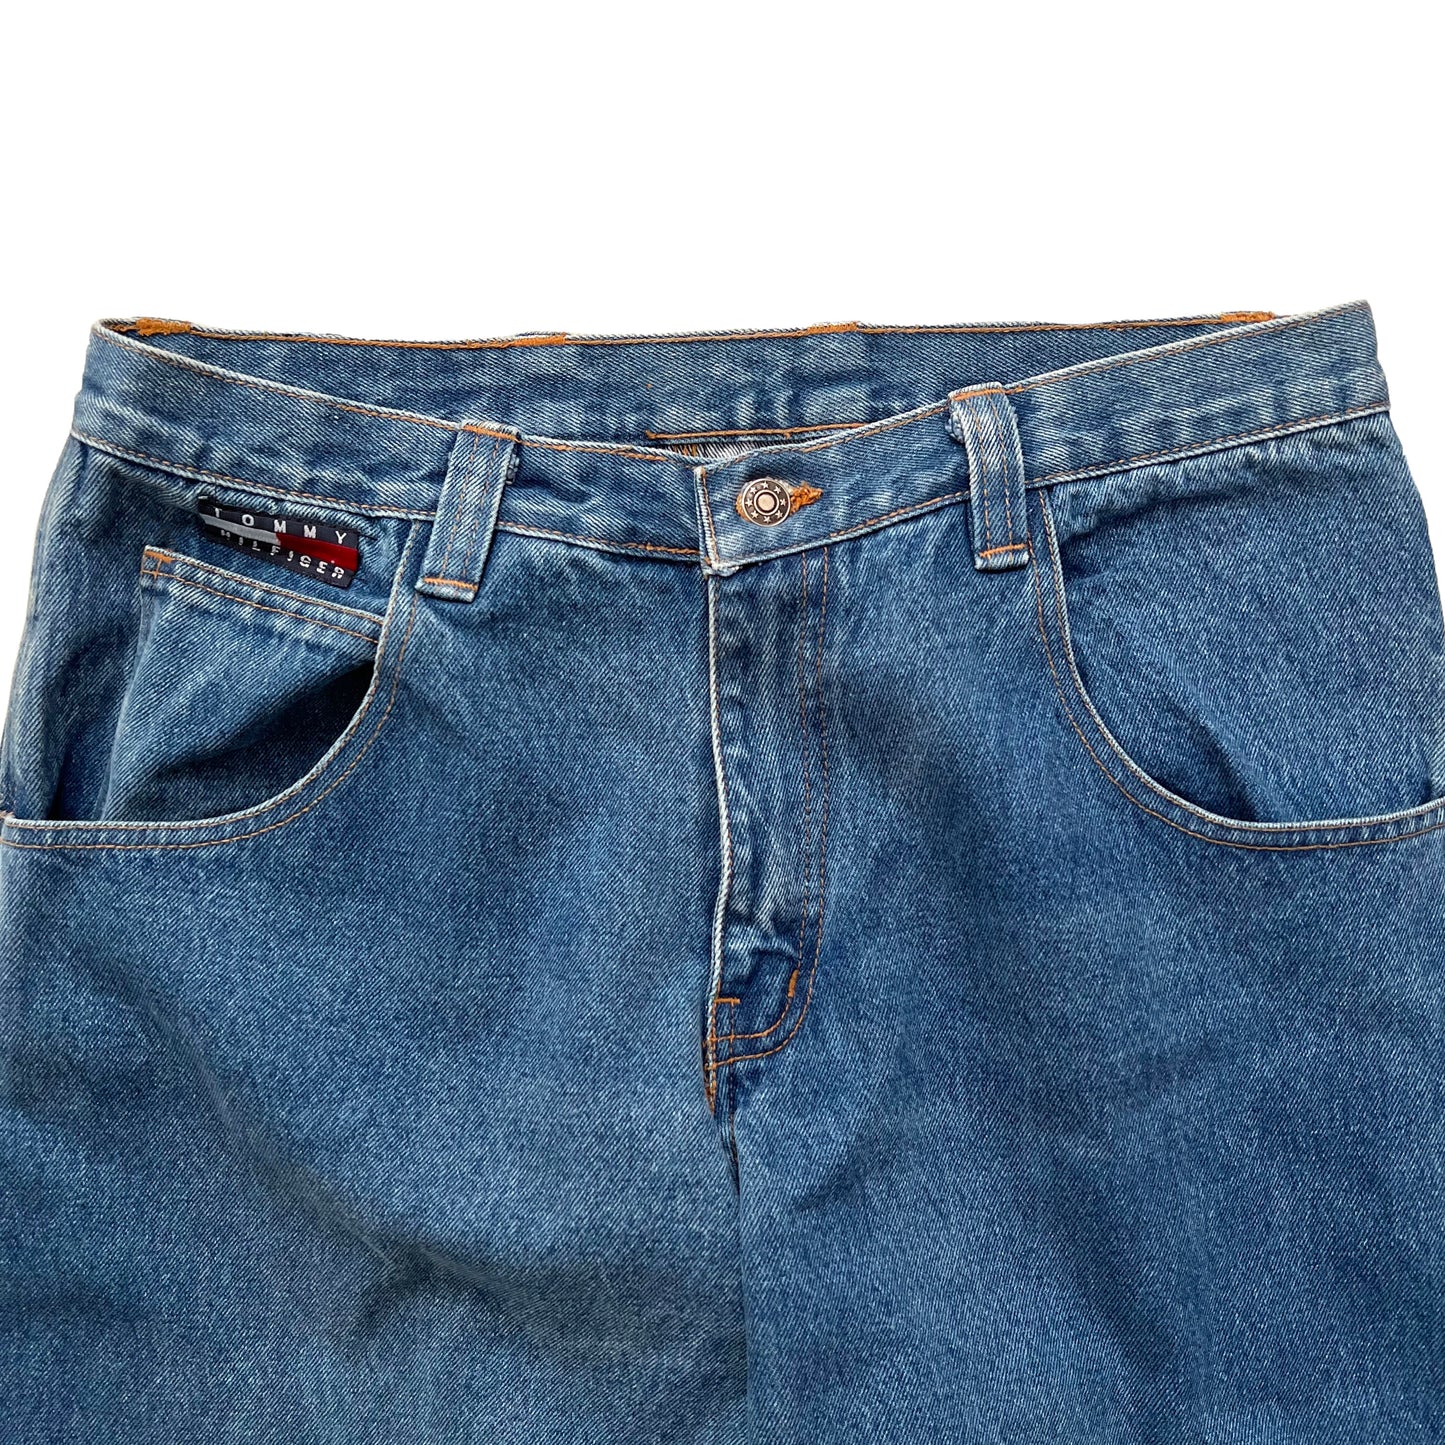 90's BOOTLEG TOMMY HILFIGER WIDE TAPERED JEANS